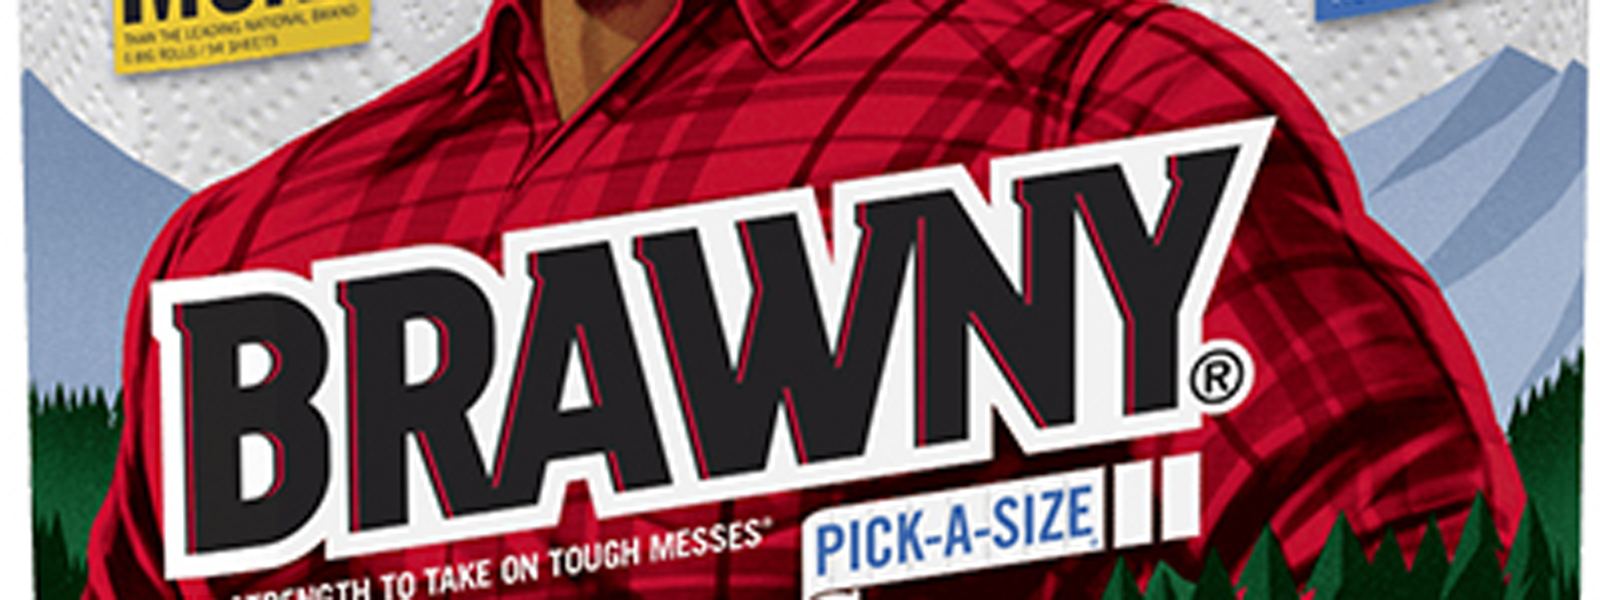 Brawny is Bigger and Better Than Ever 